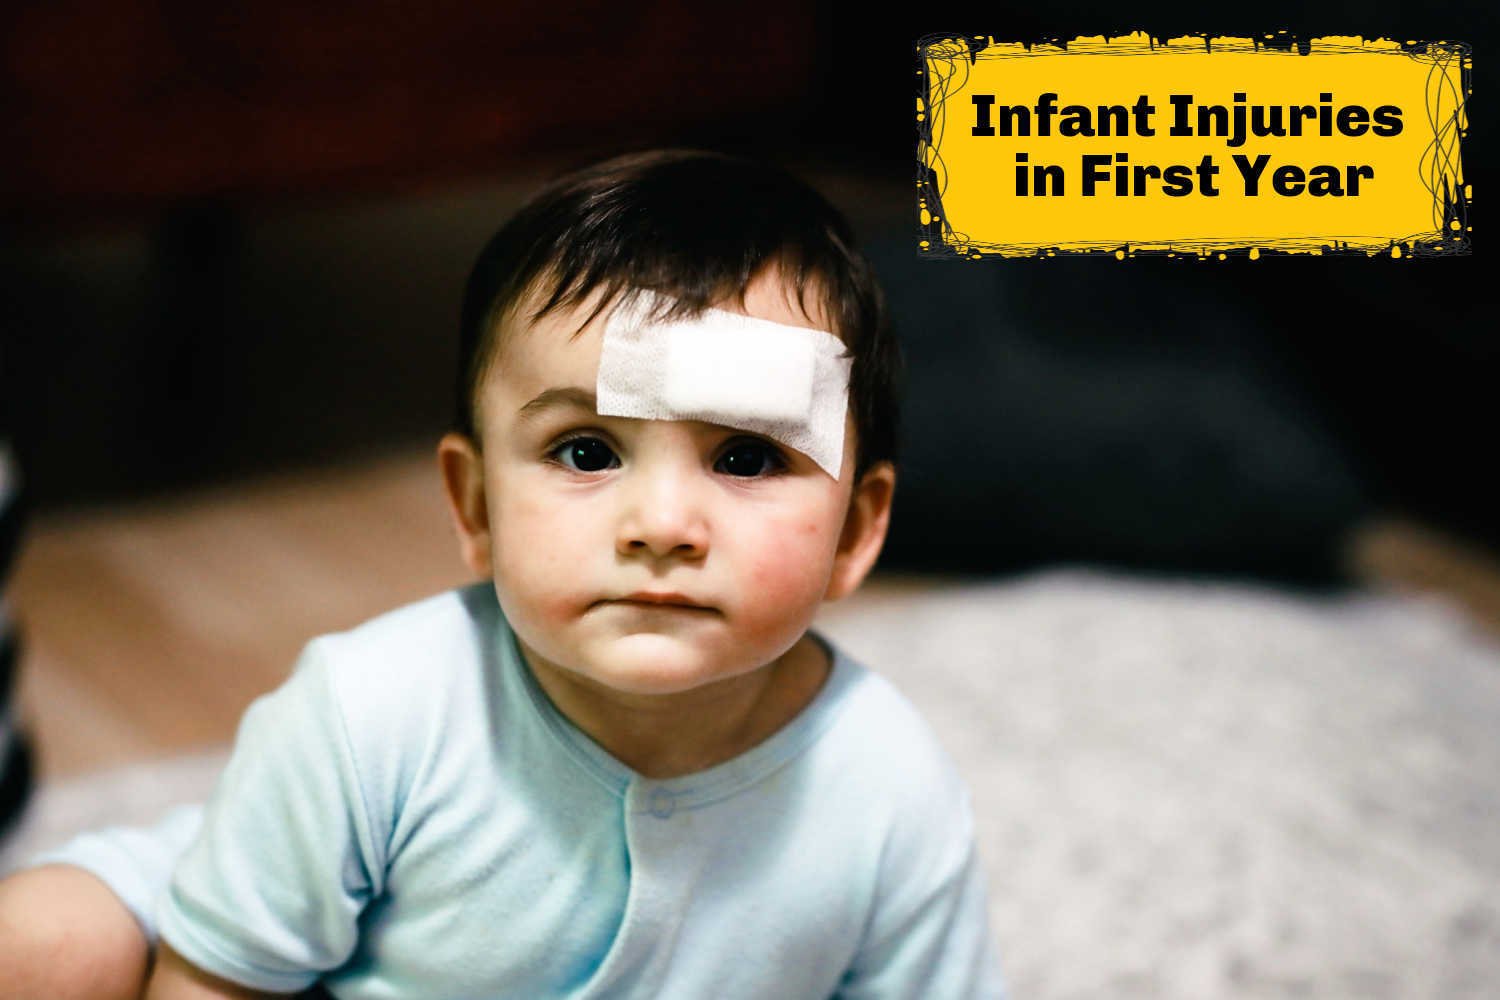 Infant Injuries in the First Year